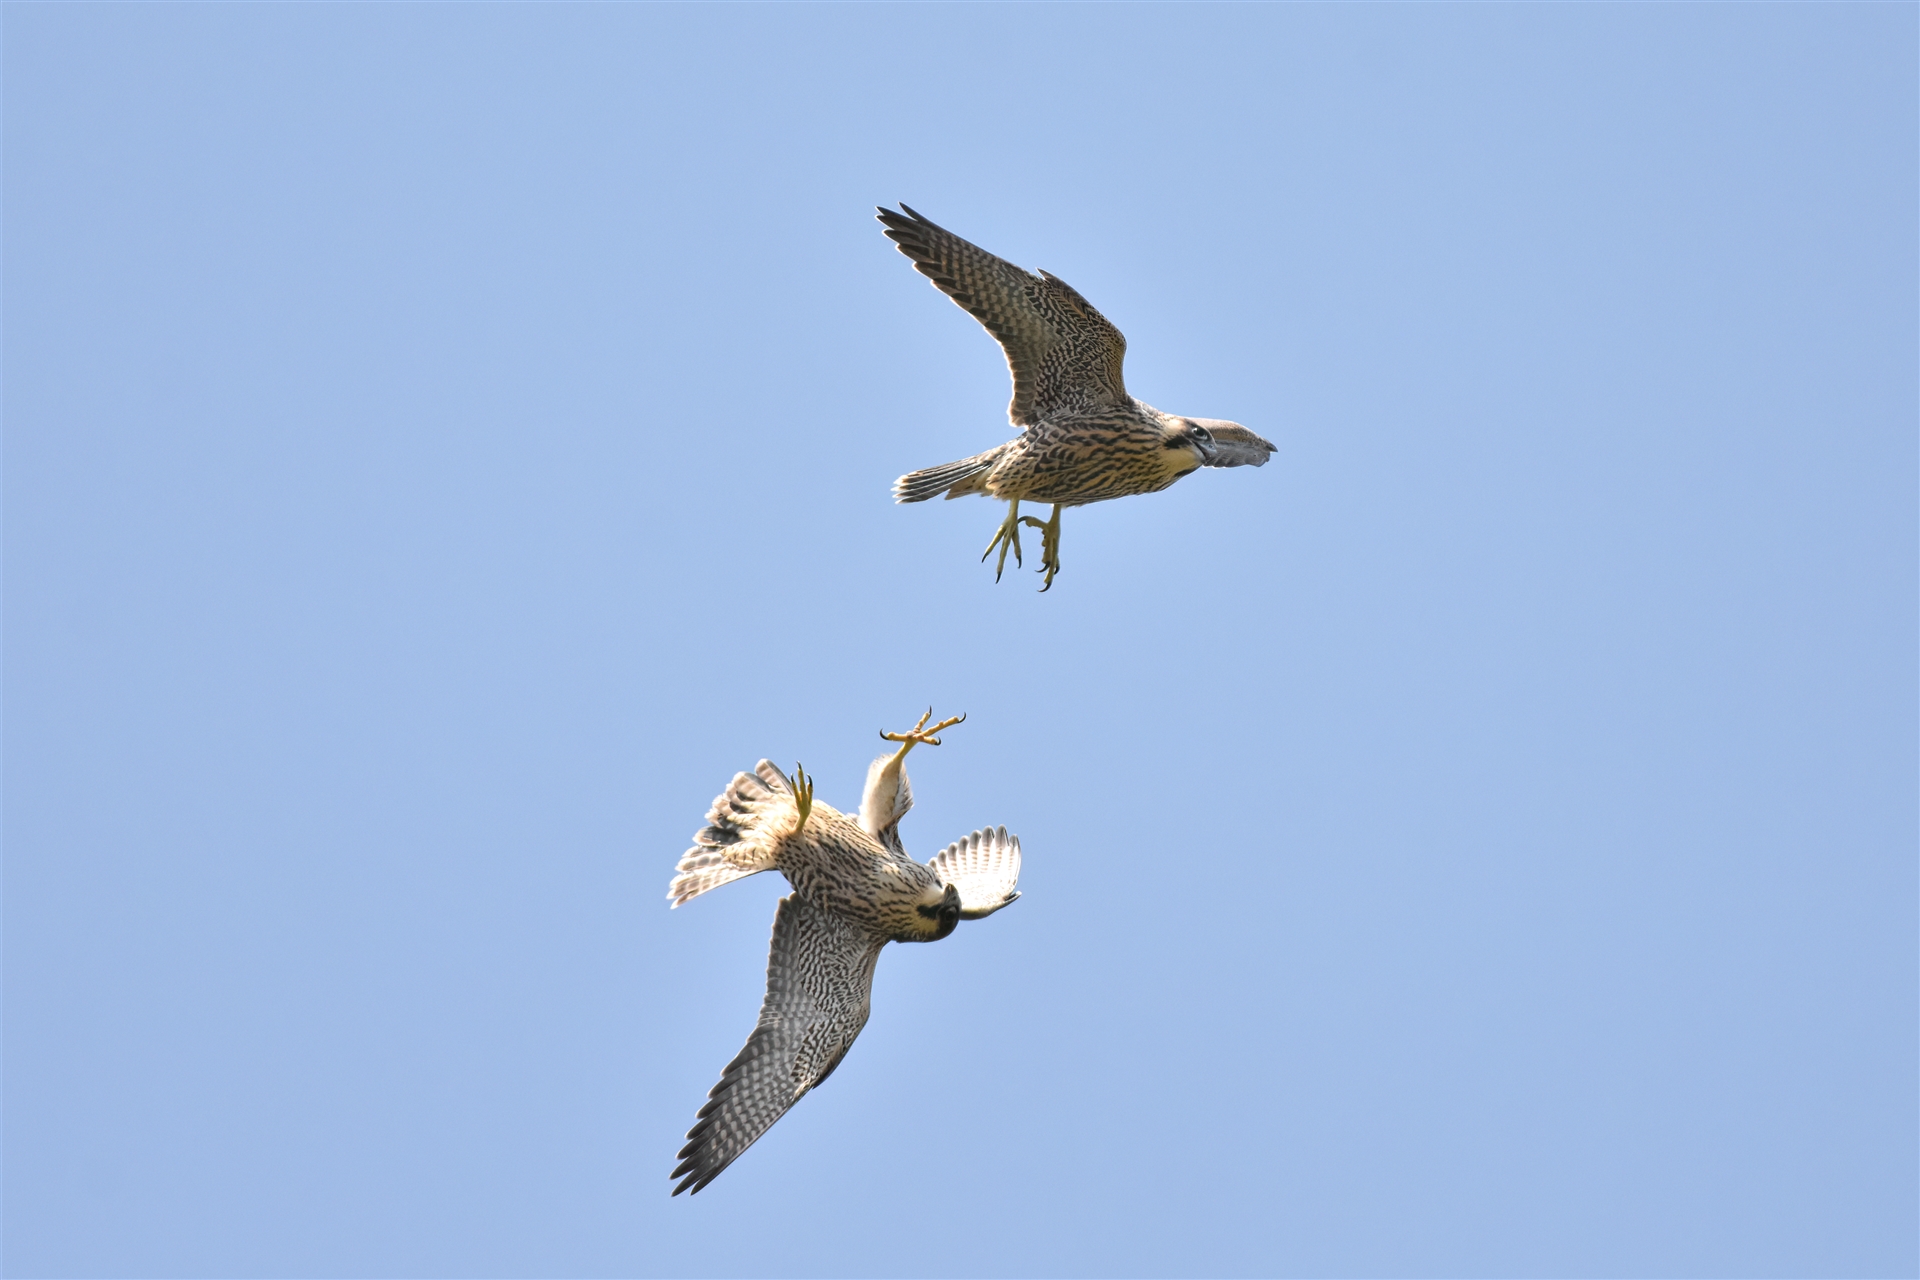 Two Peregrine Falcons in flight.